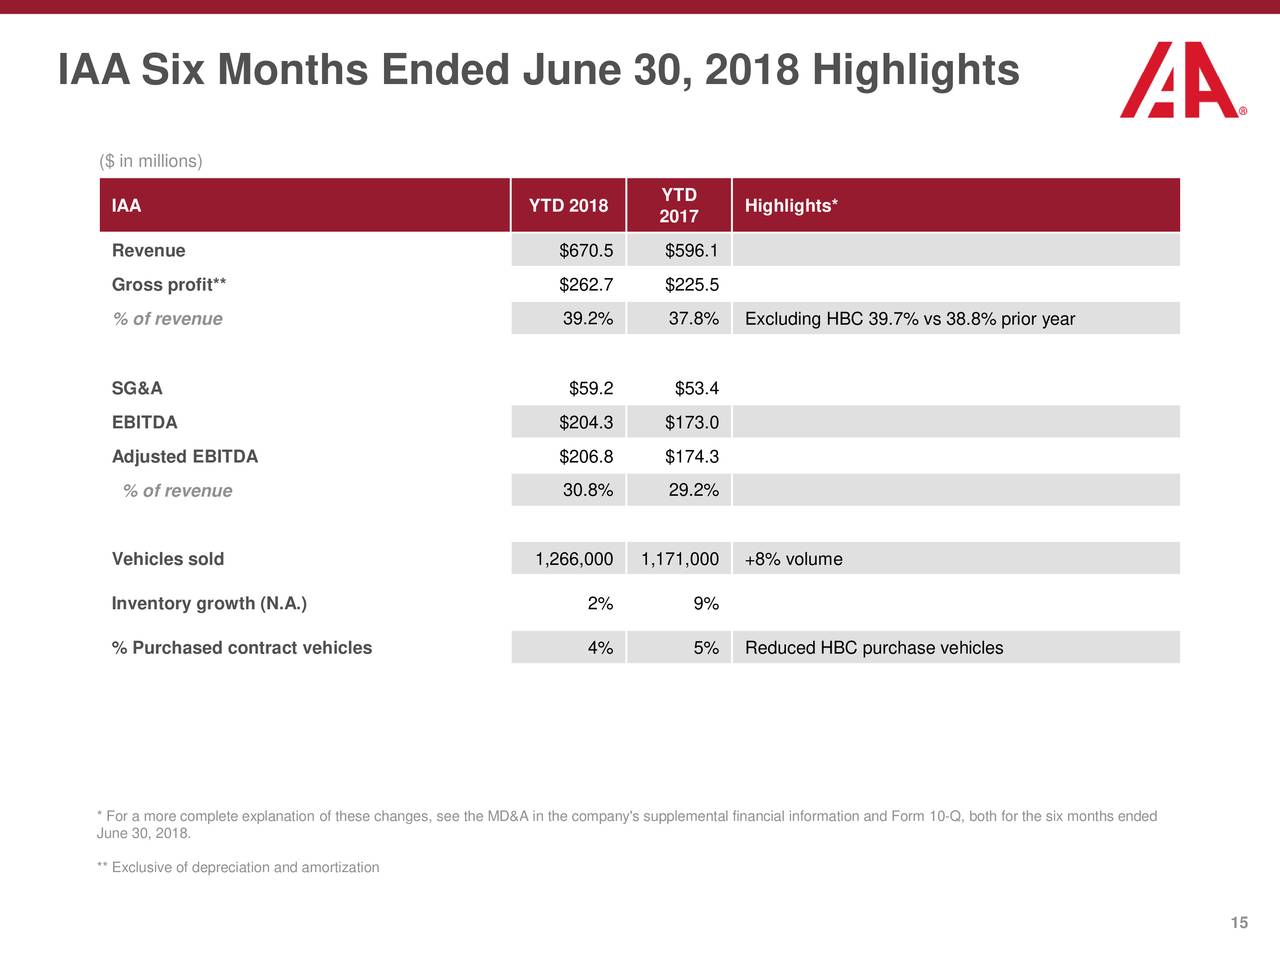 IAA Six Months Ended June 30, 2018 Highlights